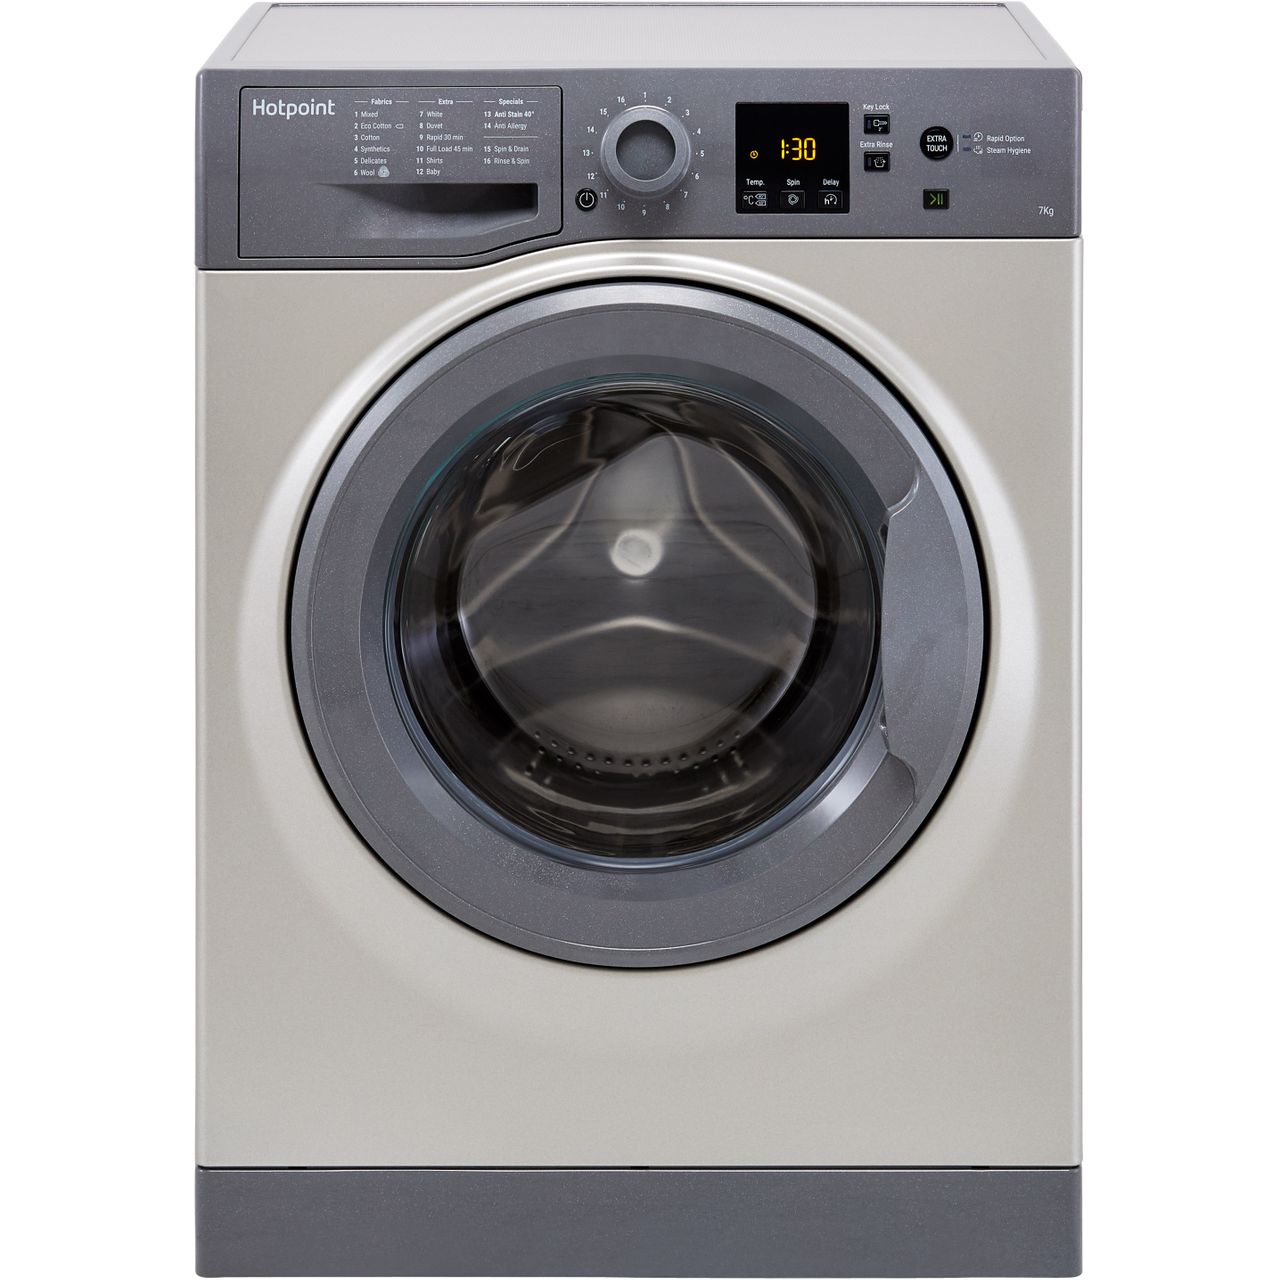 Can You Wash A Double Duvet In A 7kg Washing Machine Hotpoint Nswm743ugguk 7kg Washing Machine With 1400 Rpm Graphite A Rated